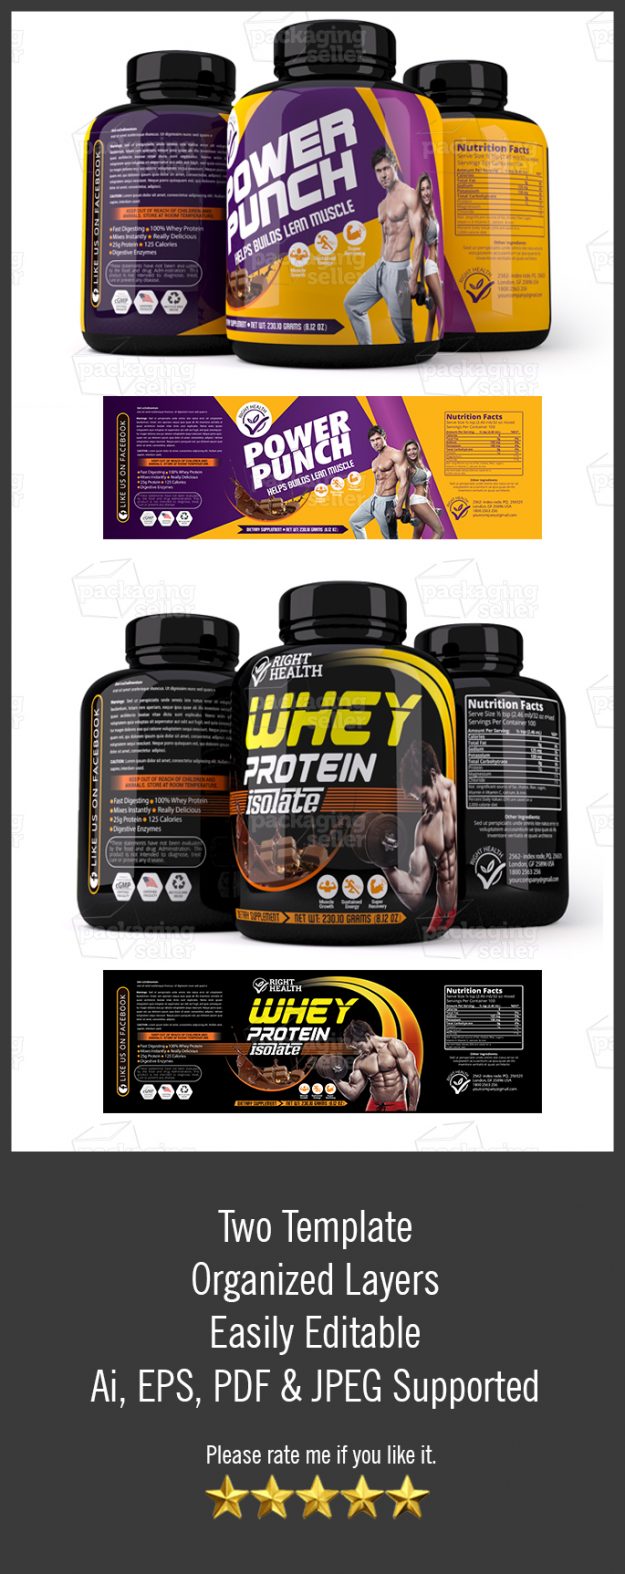 Label, Whey protein, Supplement Label